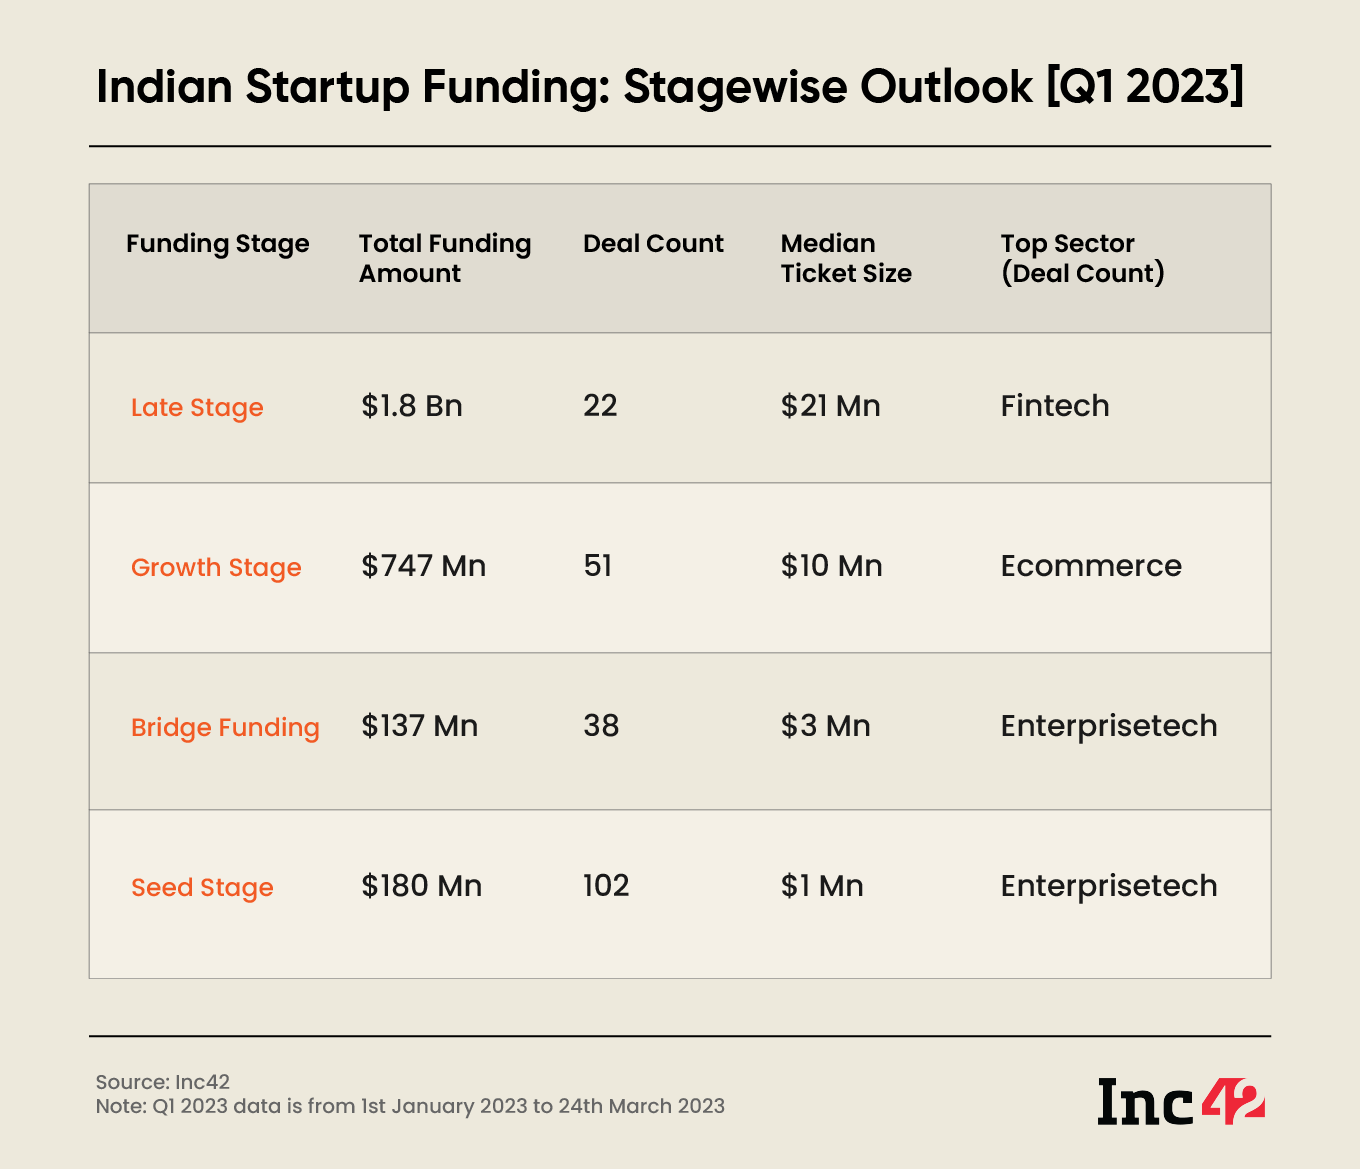 ecommerce continued to pip fintech and enterprisetech, clinching the highest number of deals for growth-stage startups in Q1 2023.